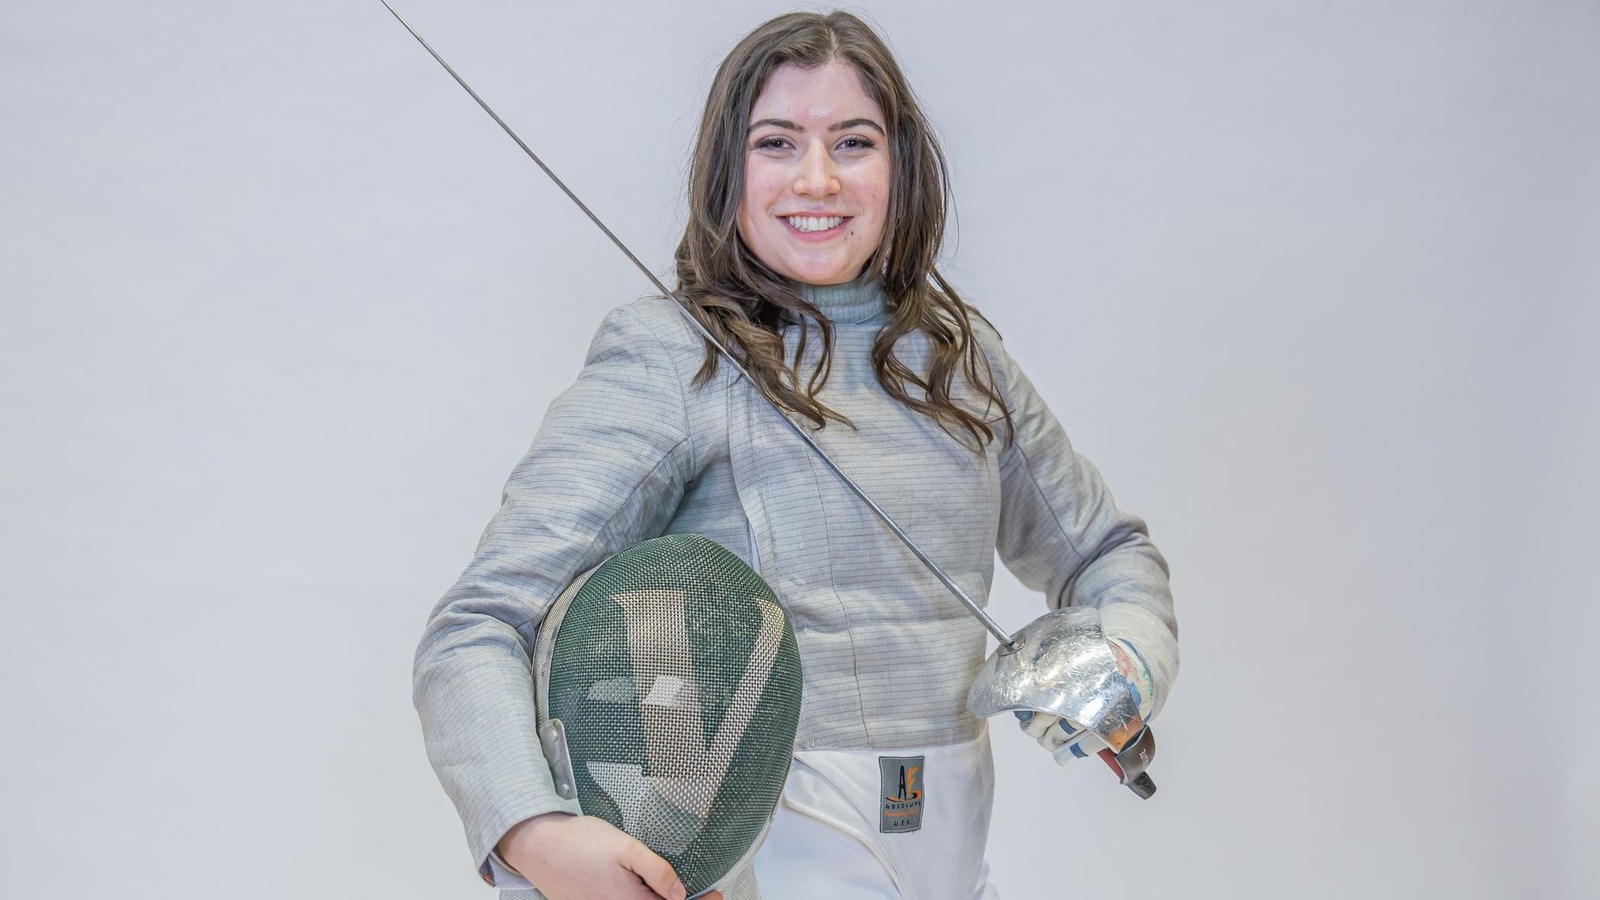 Fencing Qualifies Six For NCAA Championships